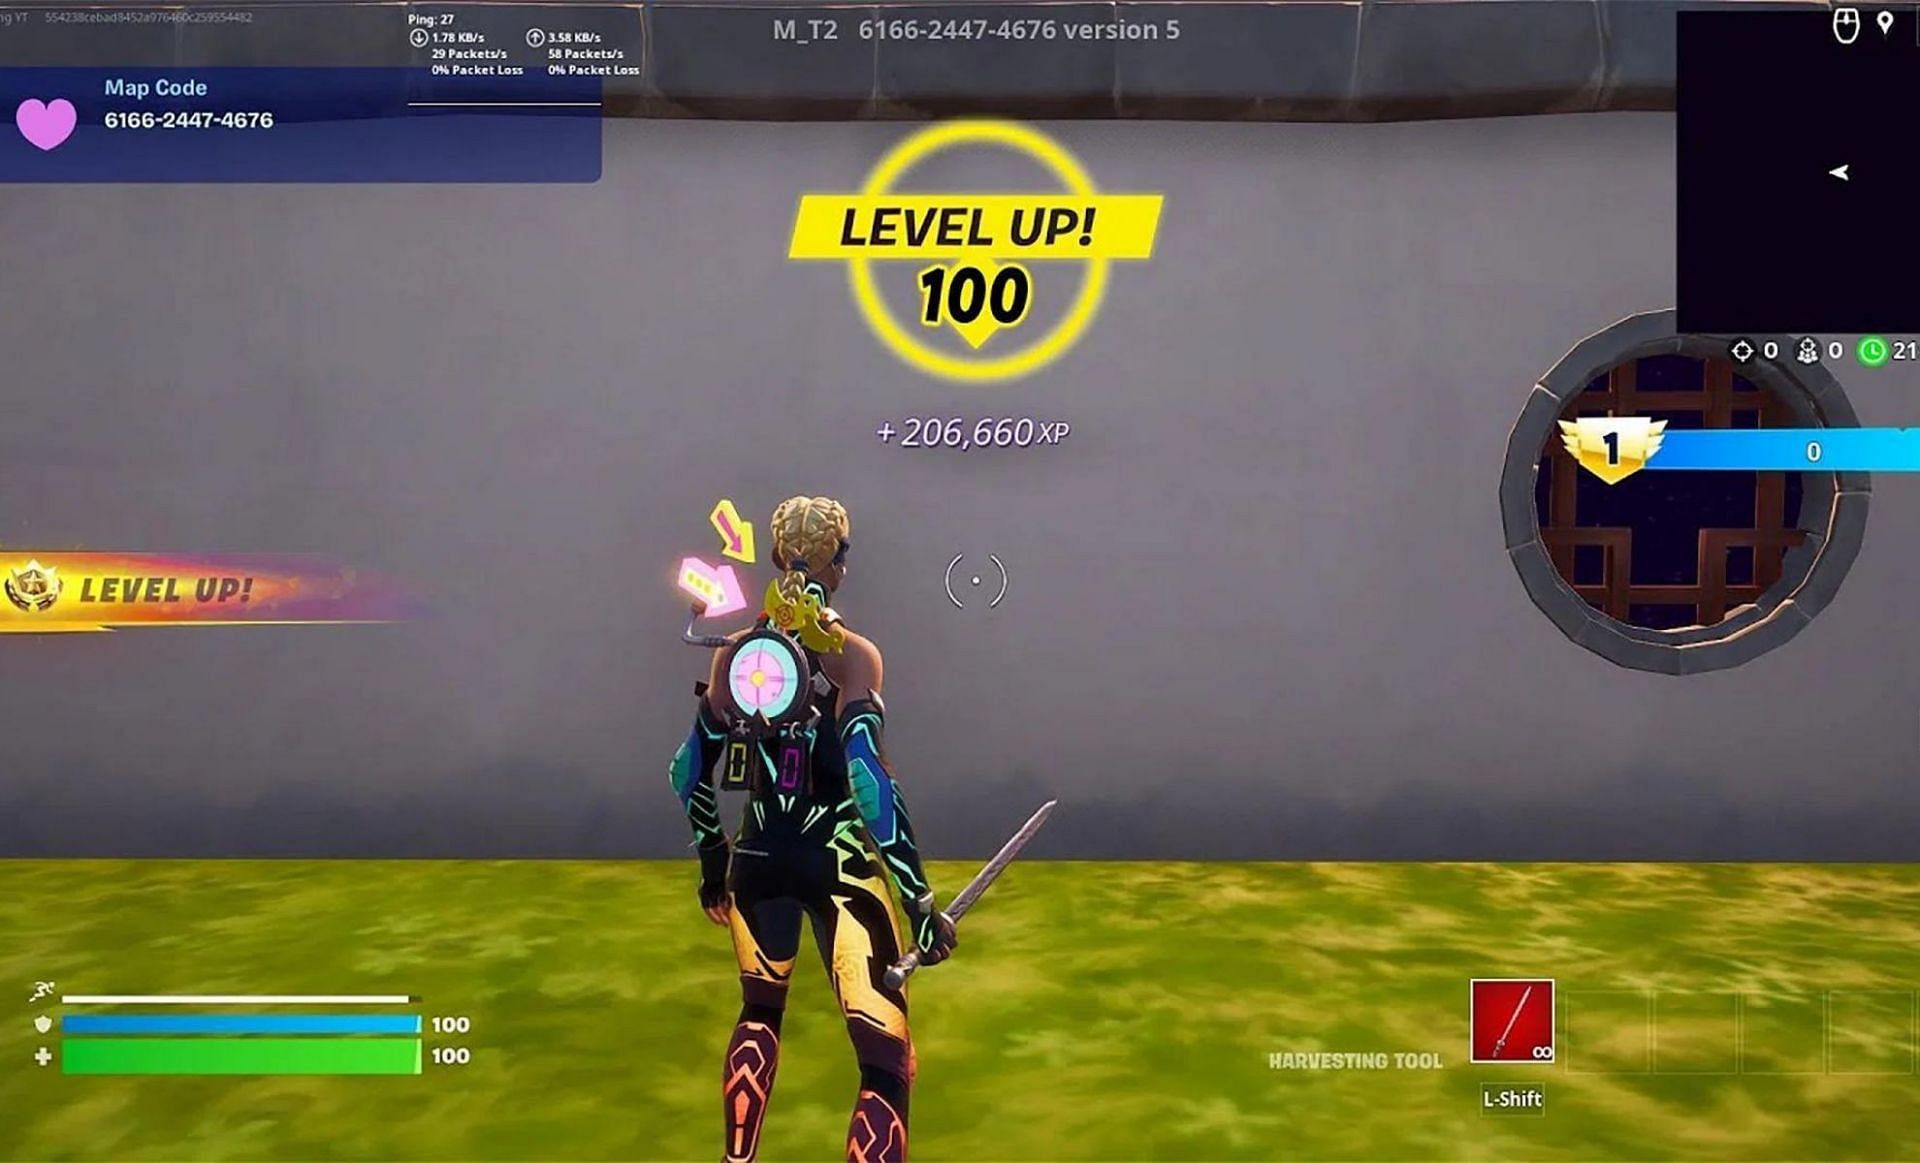 Level up quickly with XP glitches (Image via Epic Games)